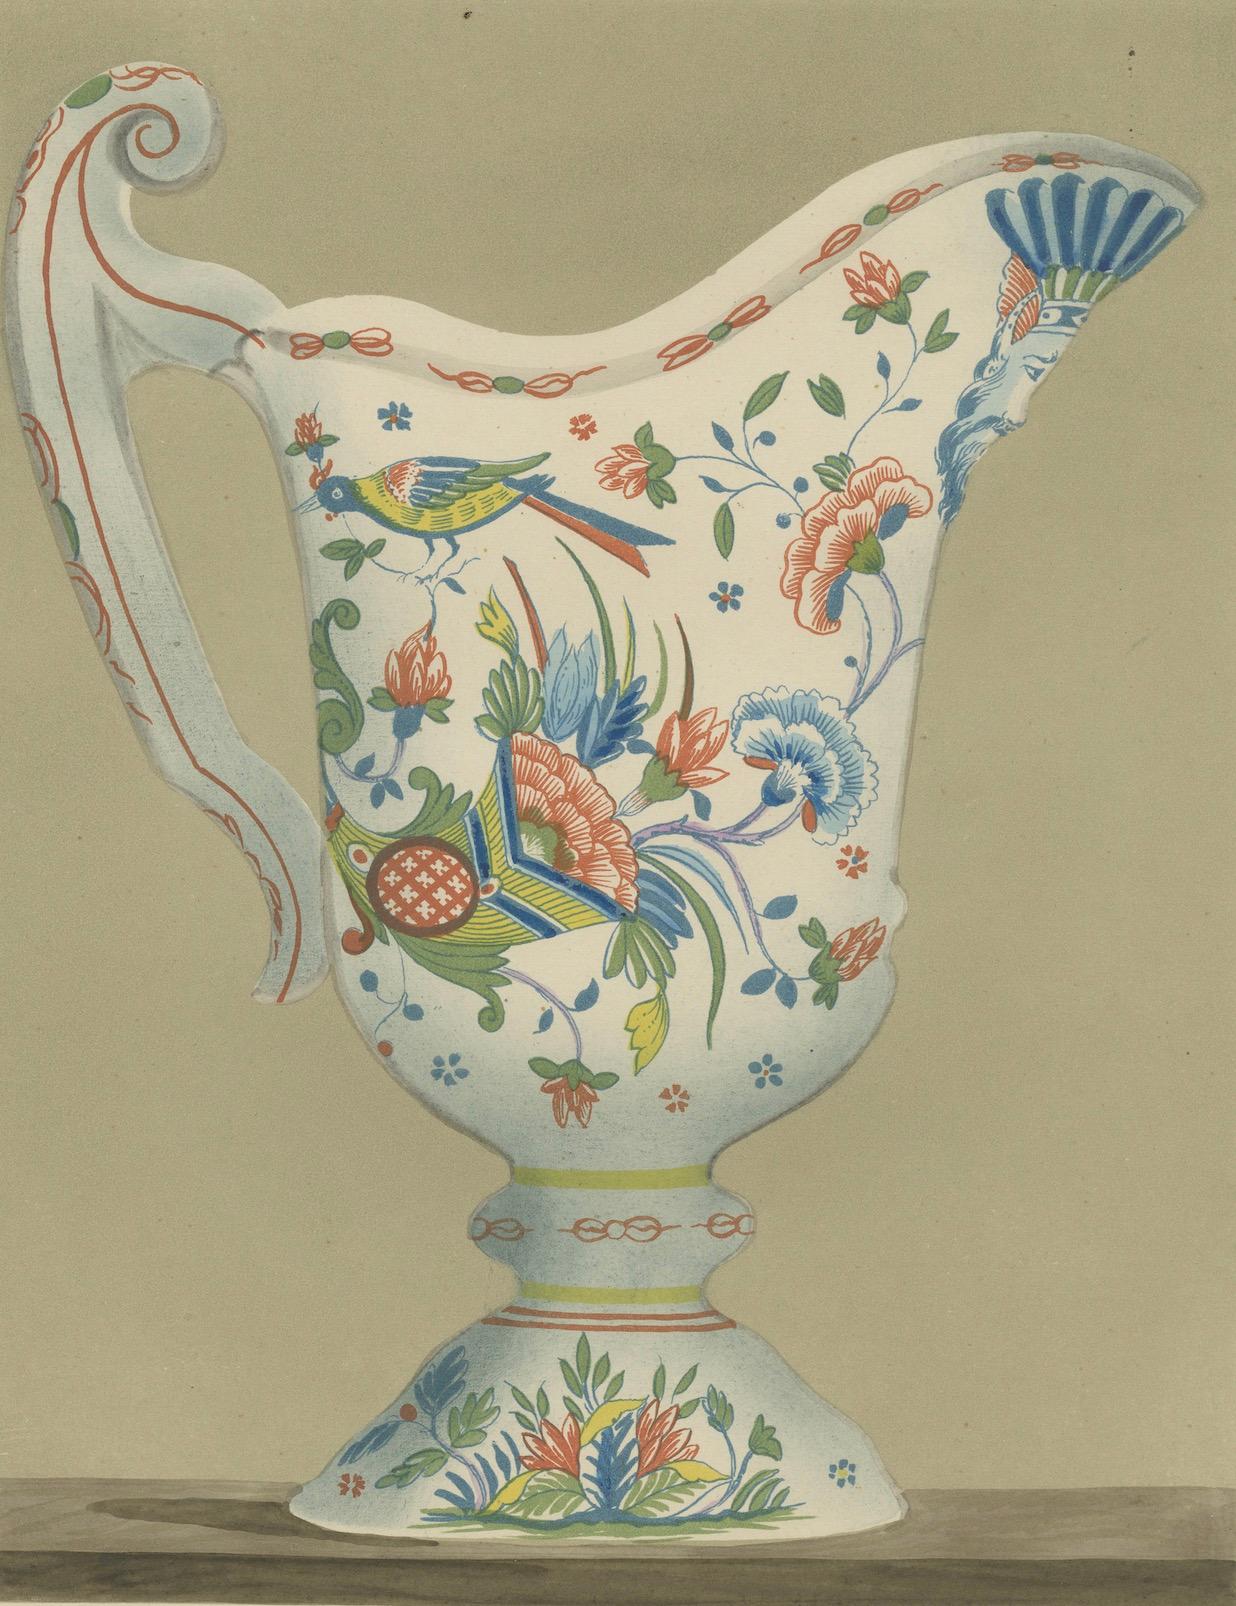 Late 19th Century Avian Elegance: Sinceny Vase - A Chromolithograph Tribute, 1874 For Sale